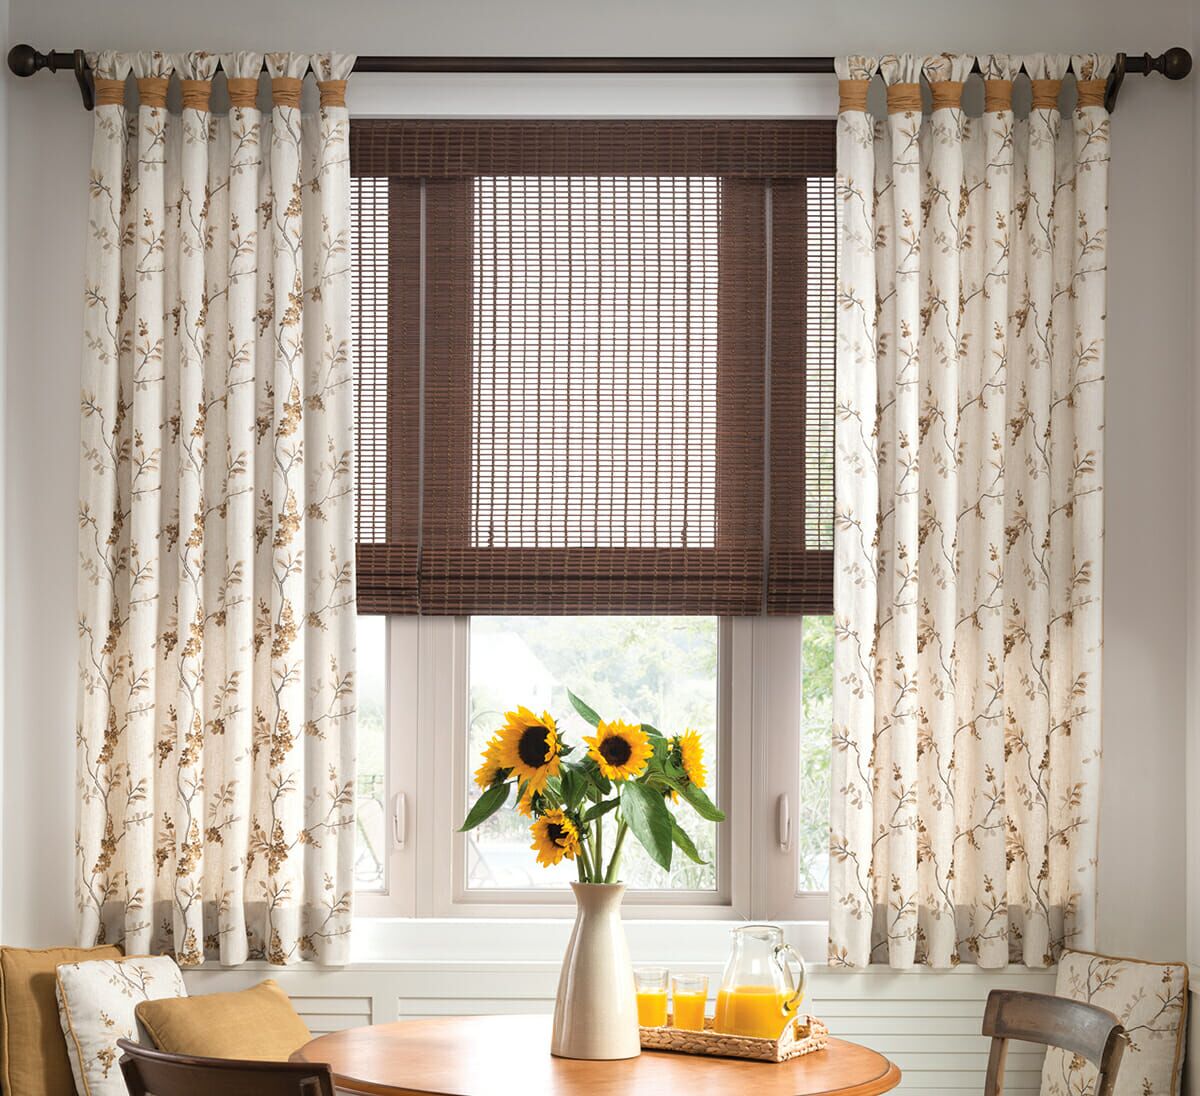 Fabric drapes create contrast with woven wood shades